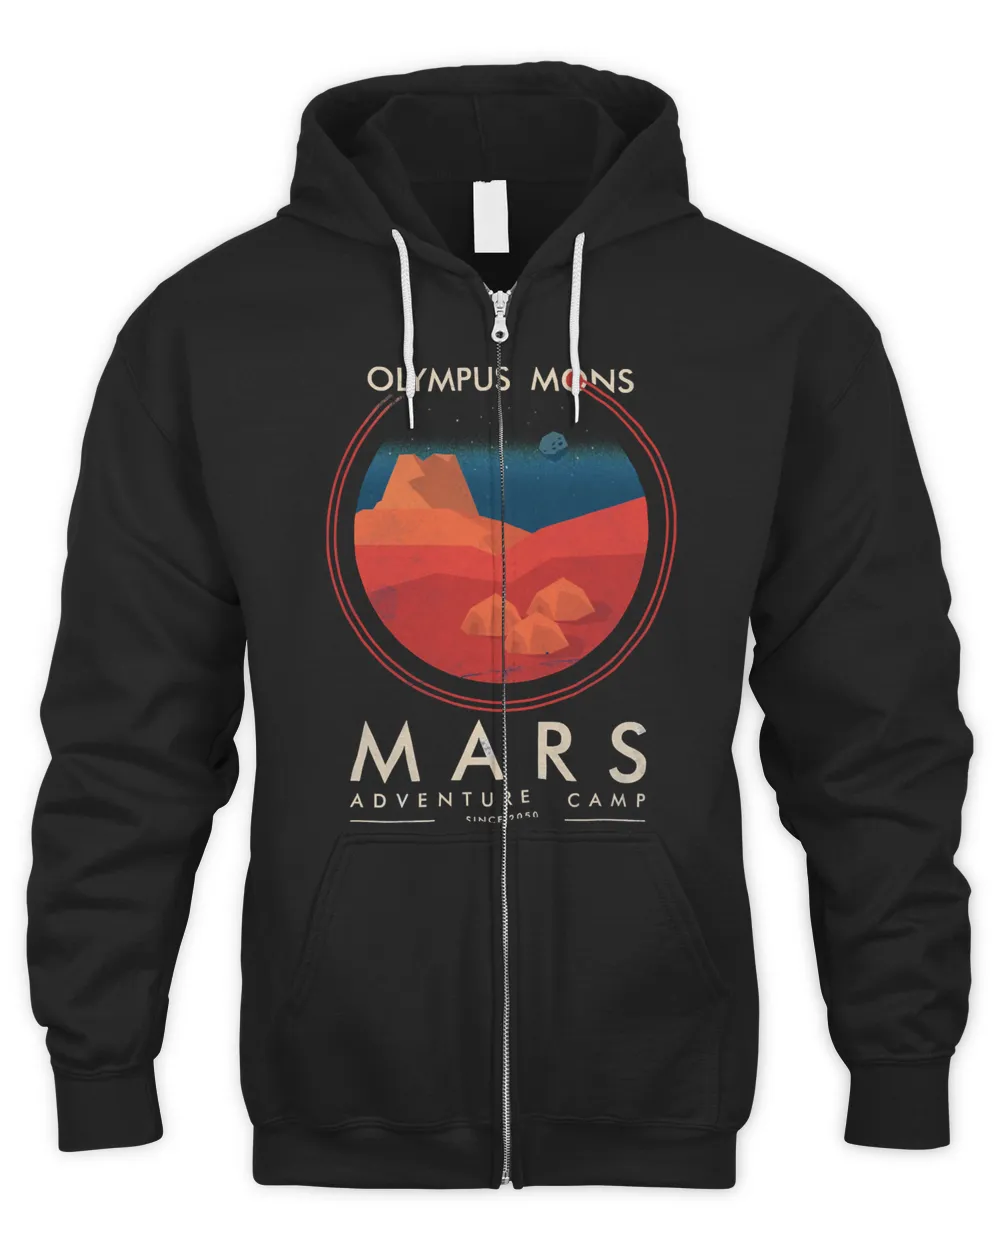 Mars Adventure Camp Olympus Mons Expedition Classic T-Shirt